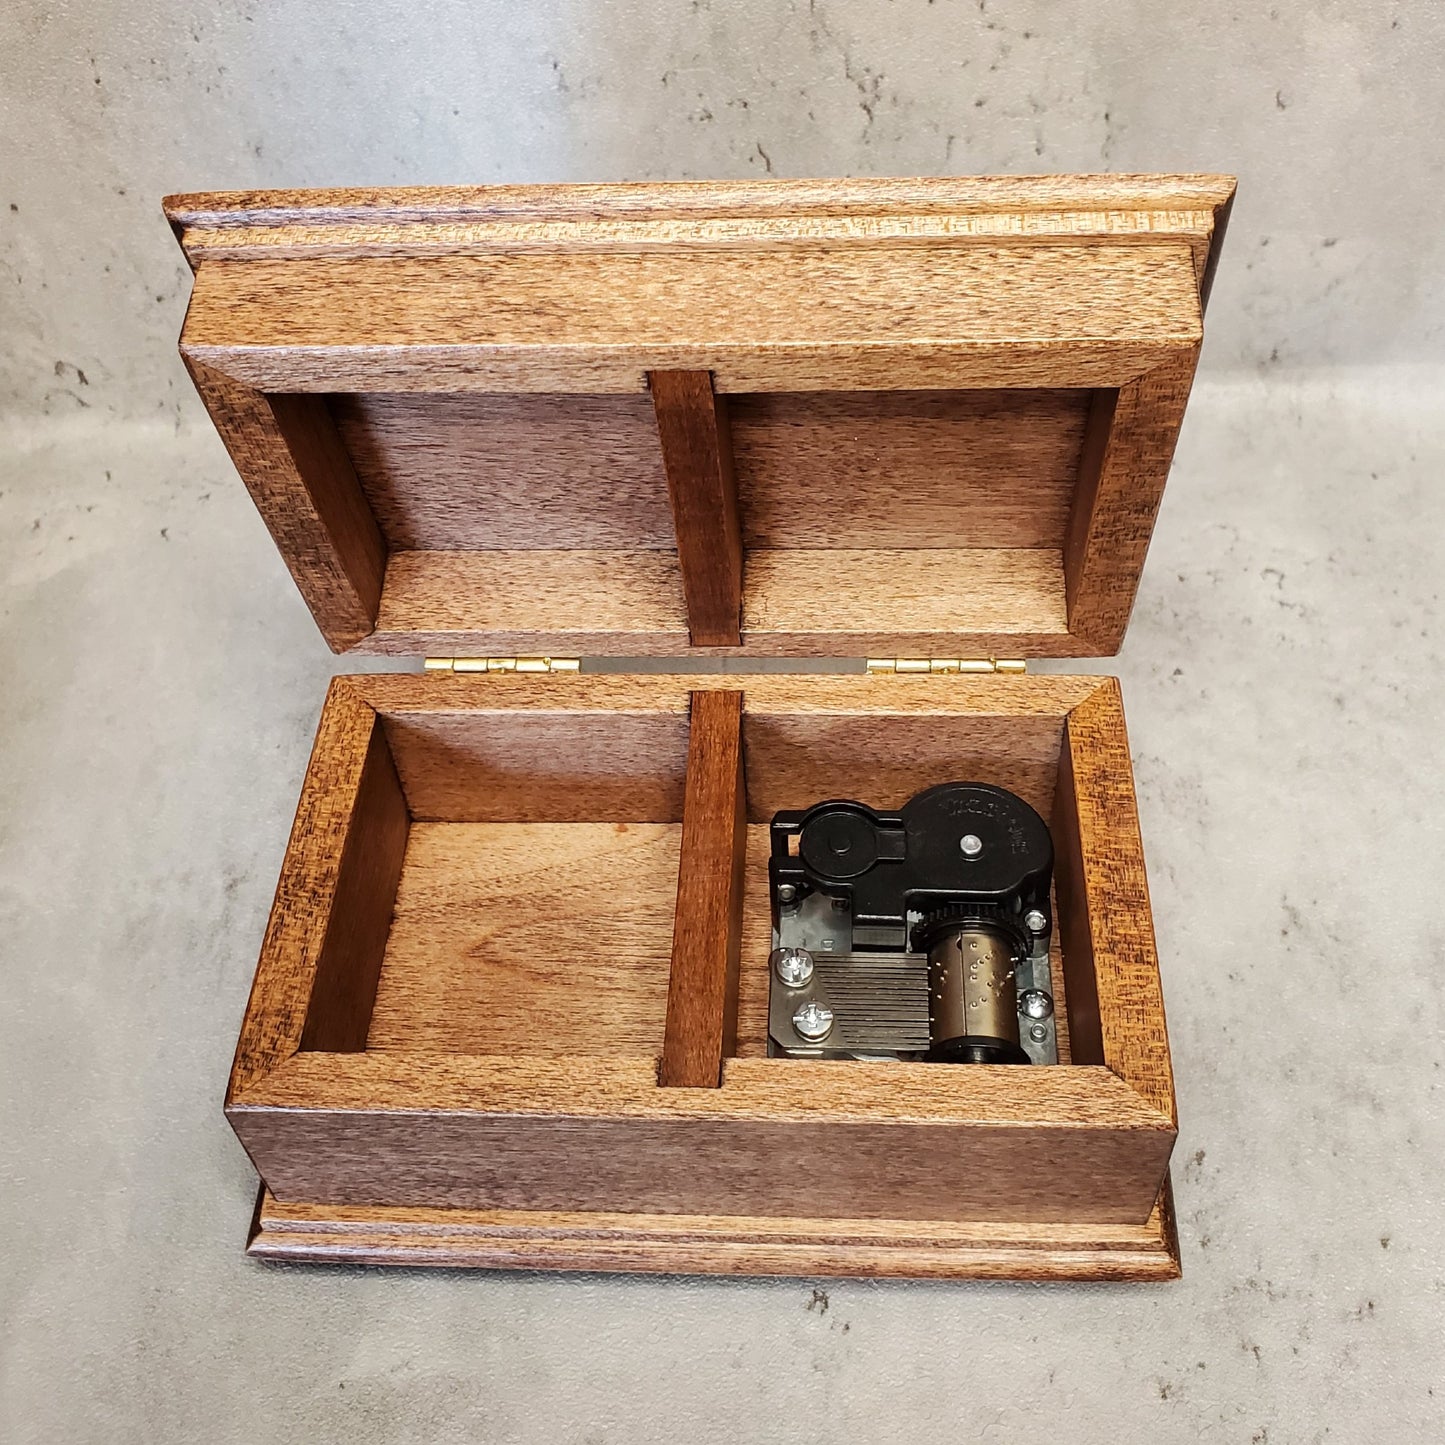 jewelry box with an open lid showing compartments, one with music box movement inside